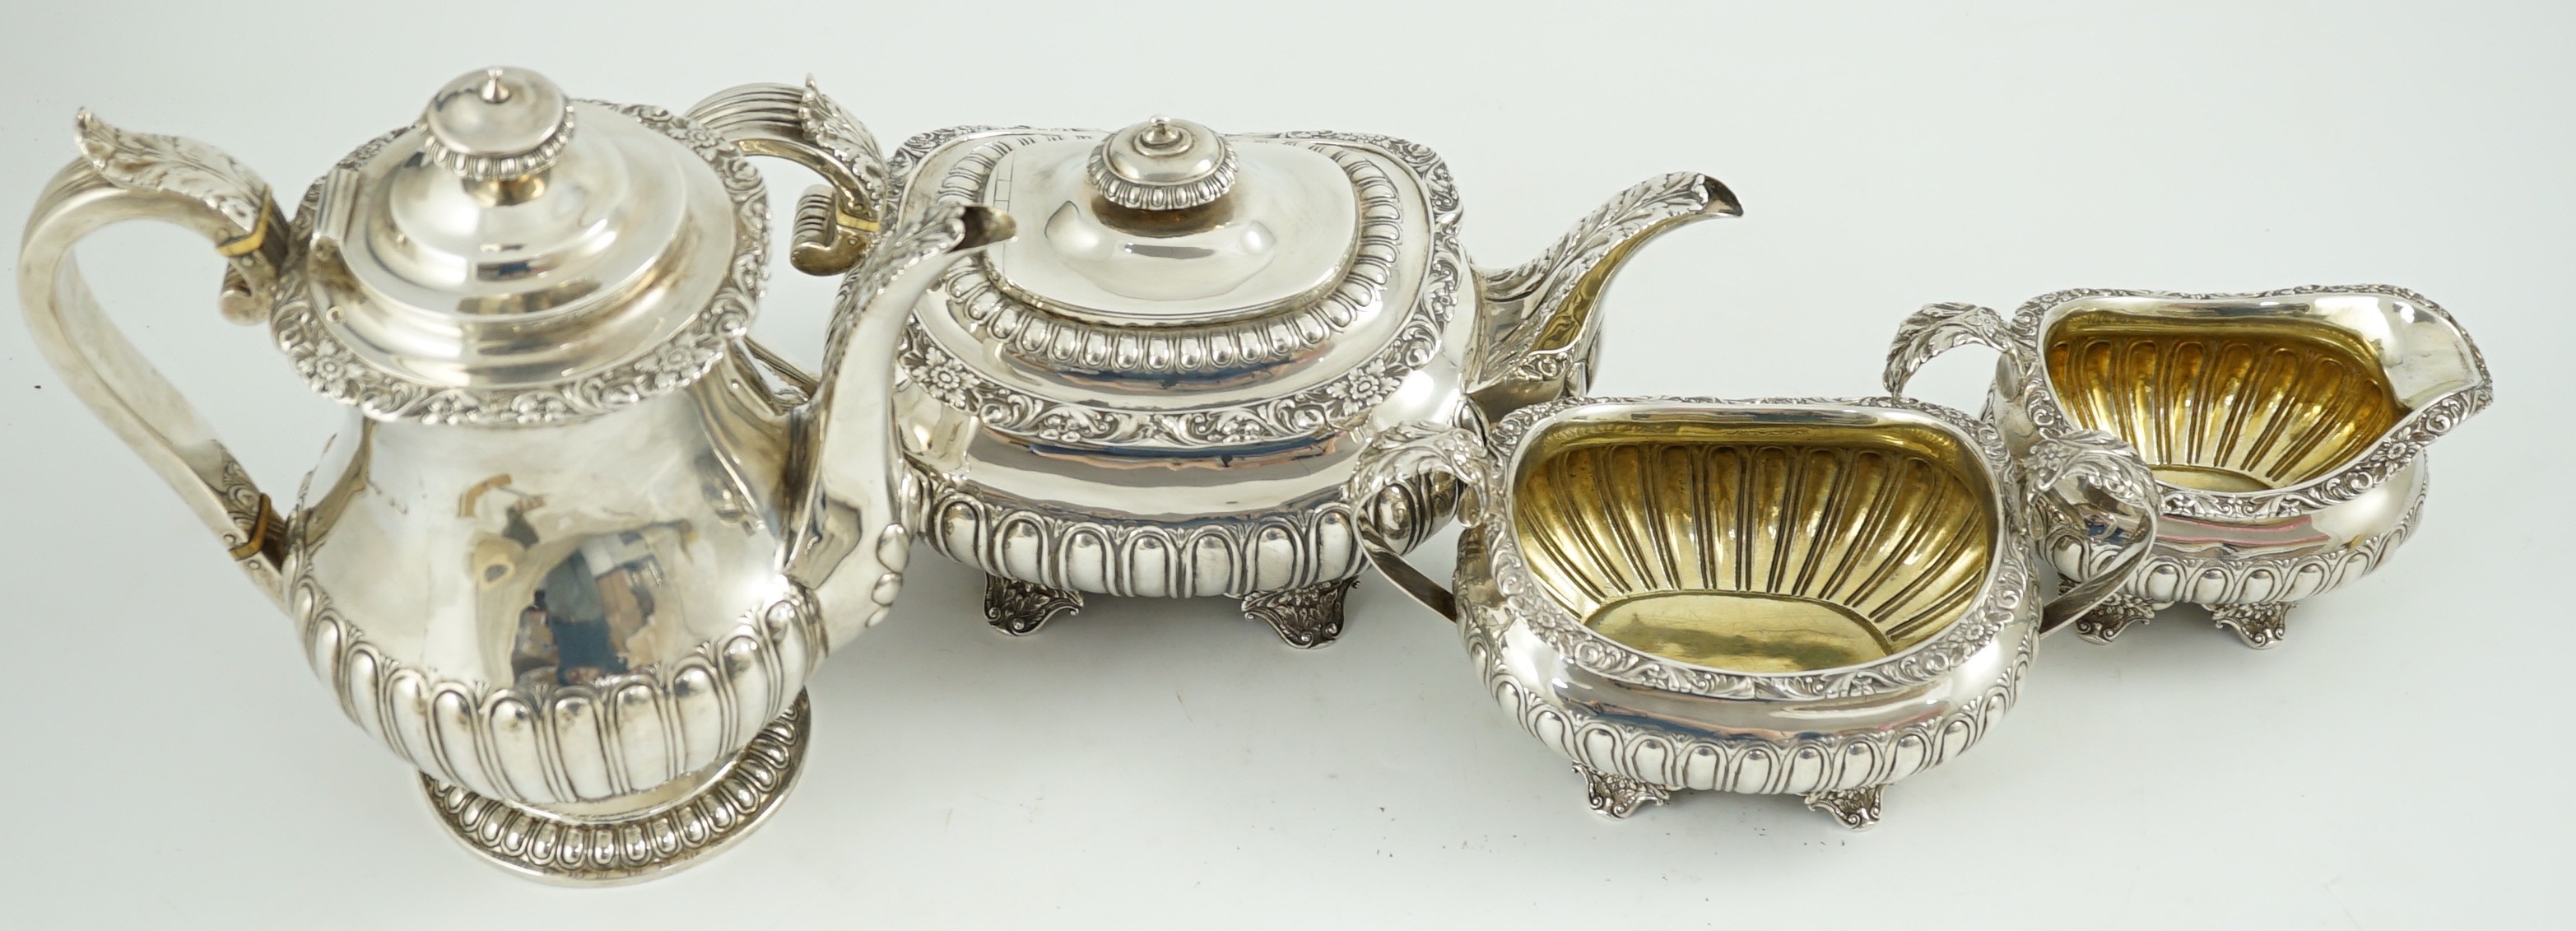 A George IV four piece demi fluted silver tea and coffee service, by Joseph Angell I